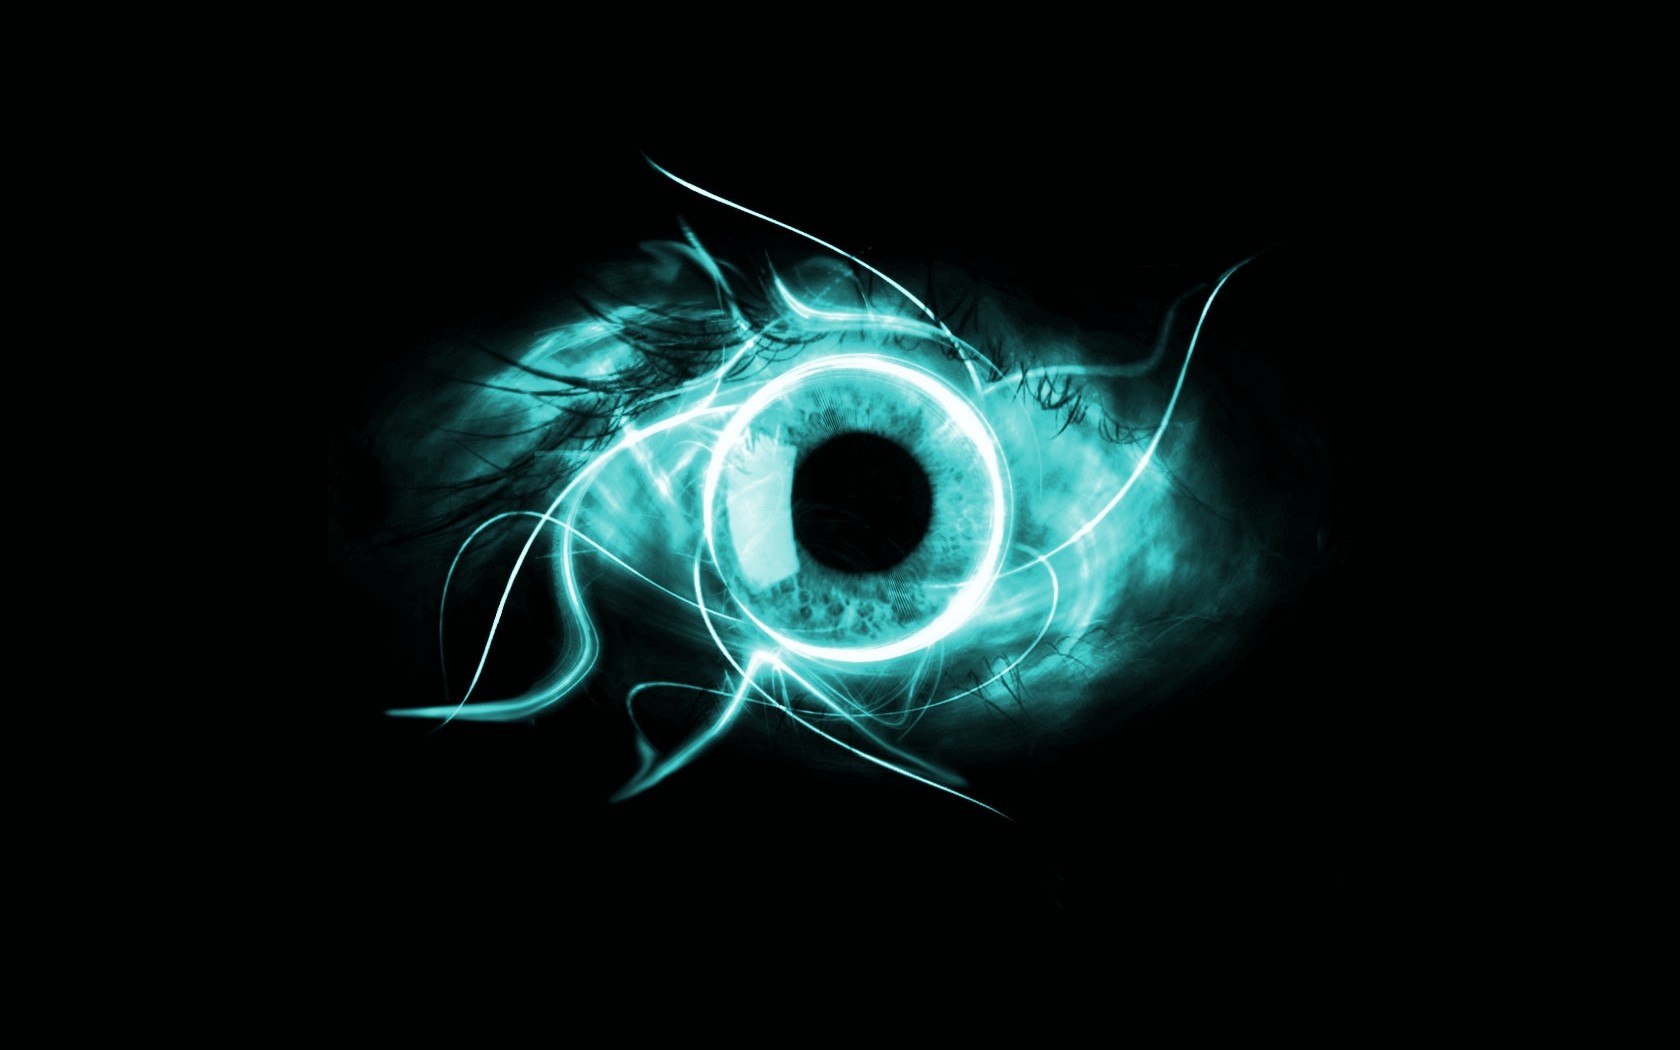 210+ Artistic Eye HD Wallpapers and Backgrounds